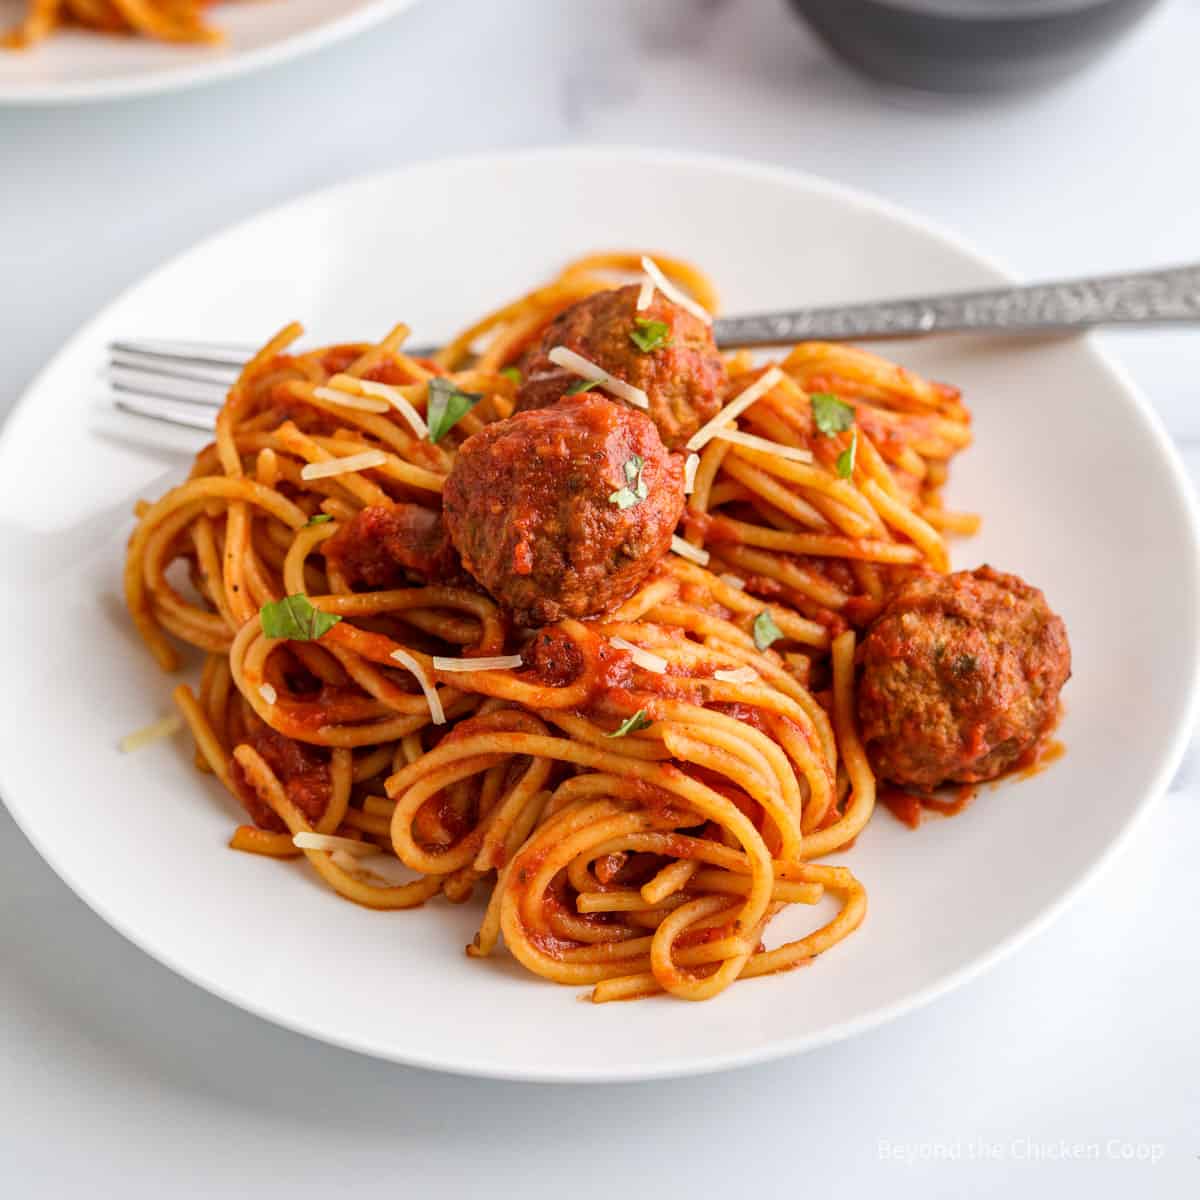 Spaghetti with sauce and meatballs on a white plate.